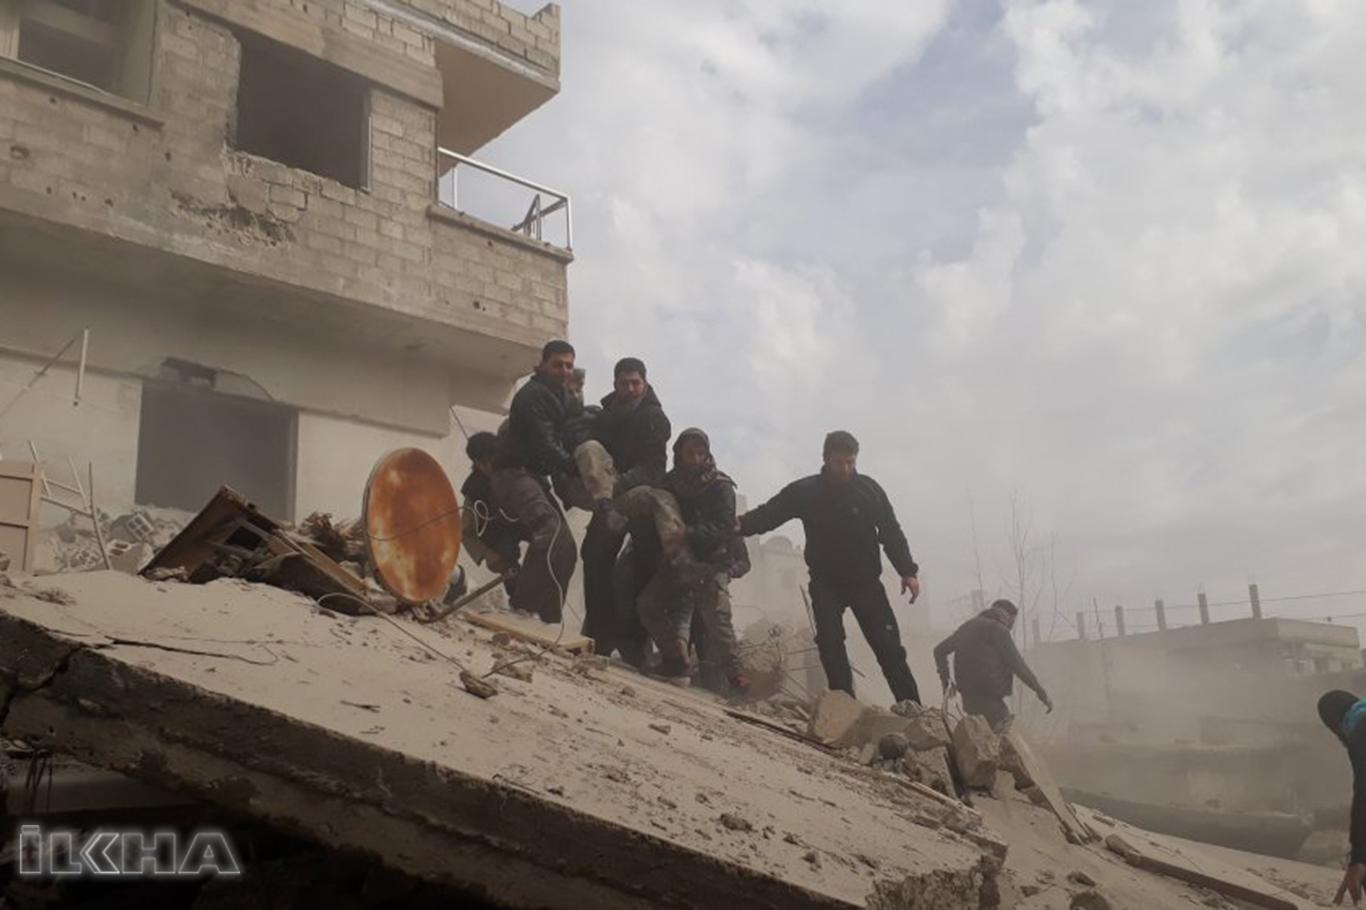 Civilian deaths continue in Eastern Ghouta